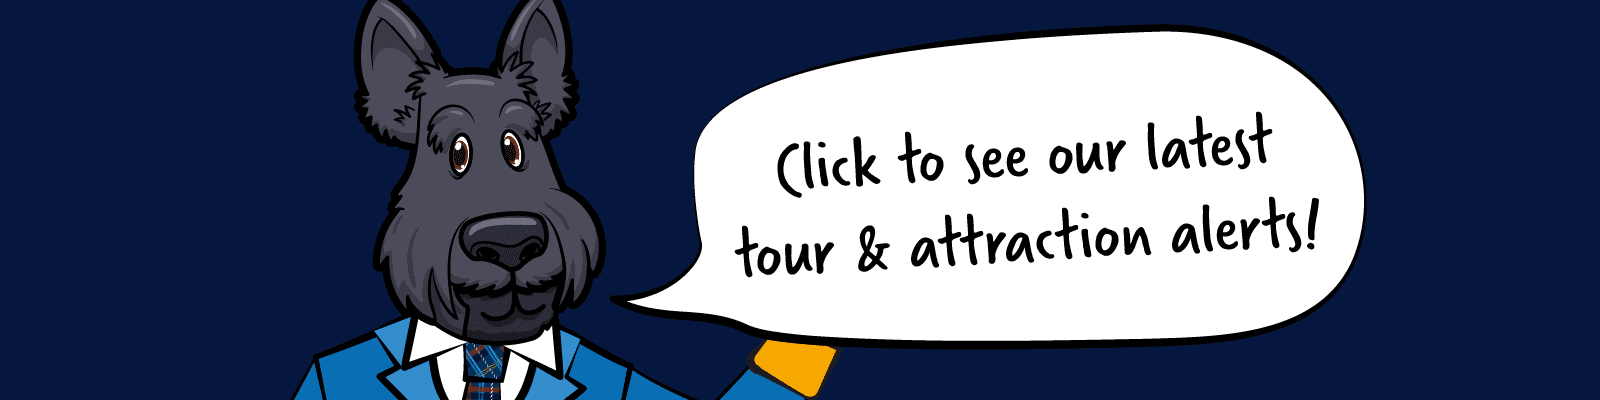 Click to see our latest tour & attraction alerts.